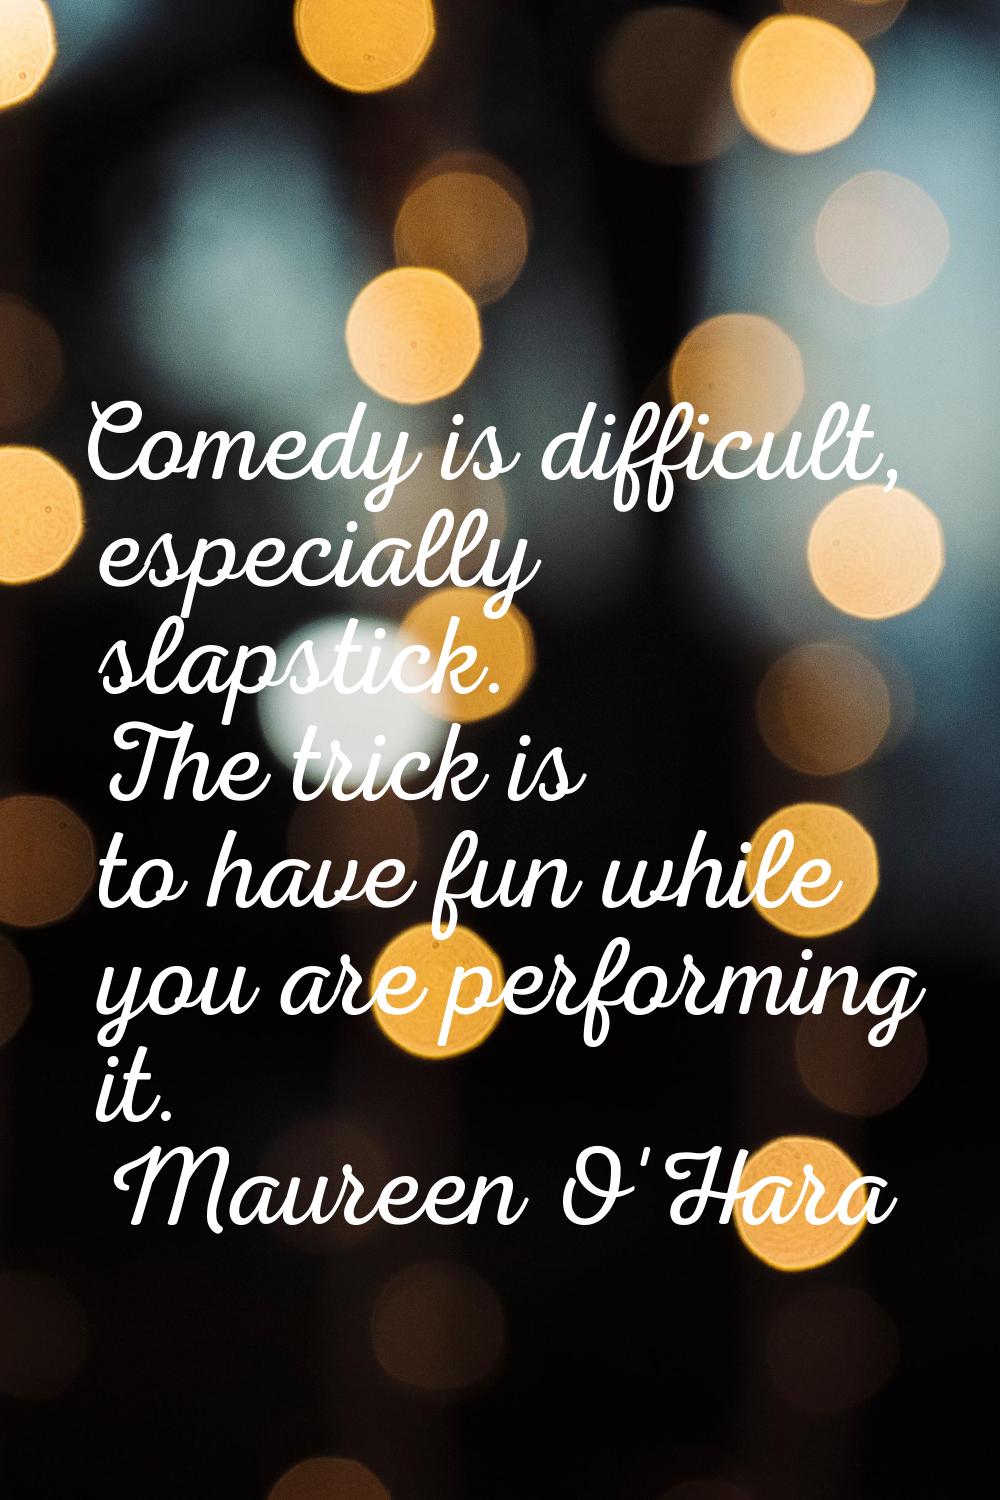 Comedy is difficult, especially slapstick. The trick is to have fun while you are performing it.